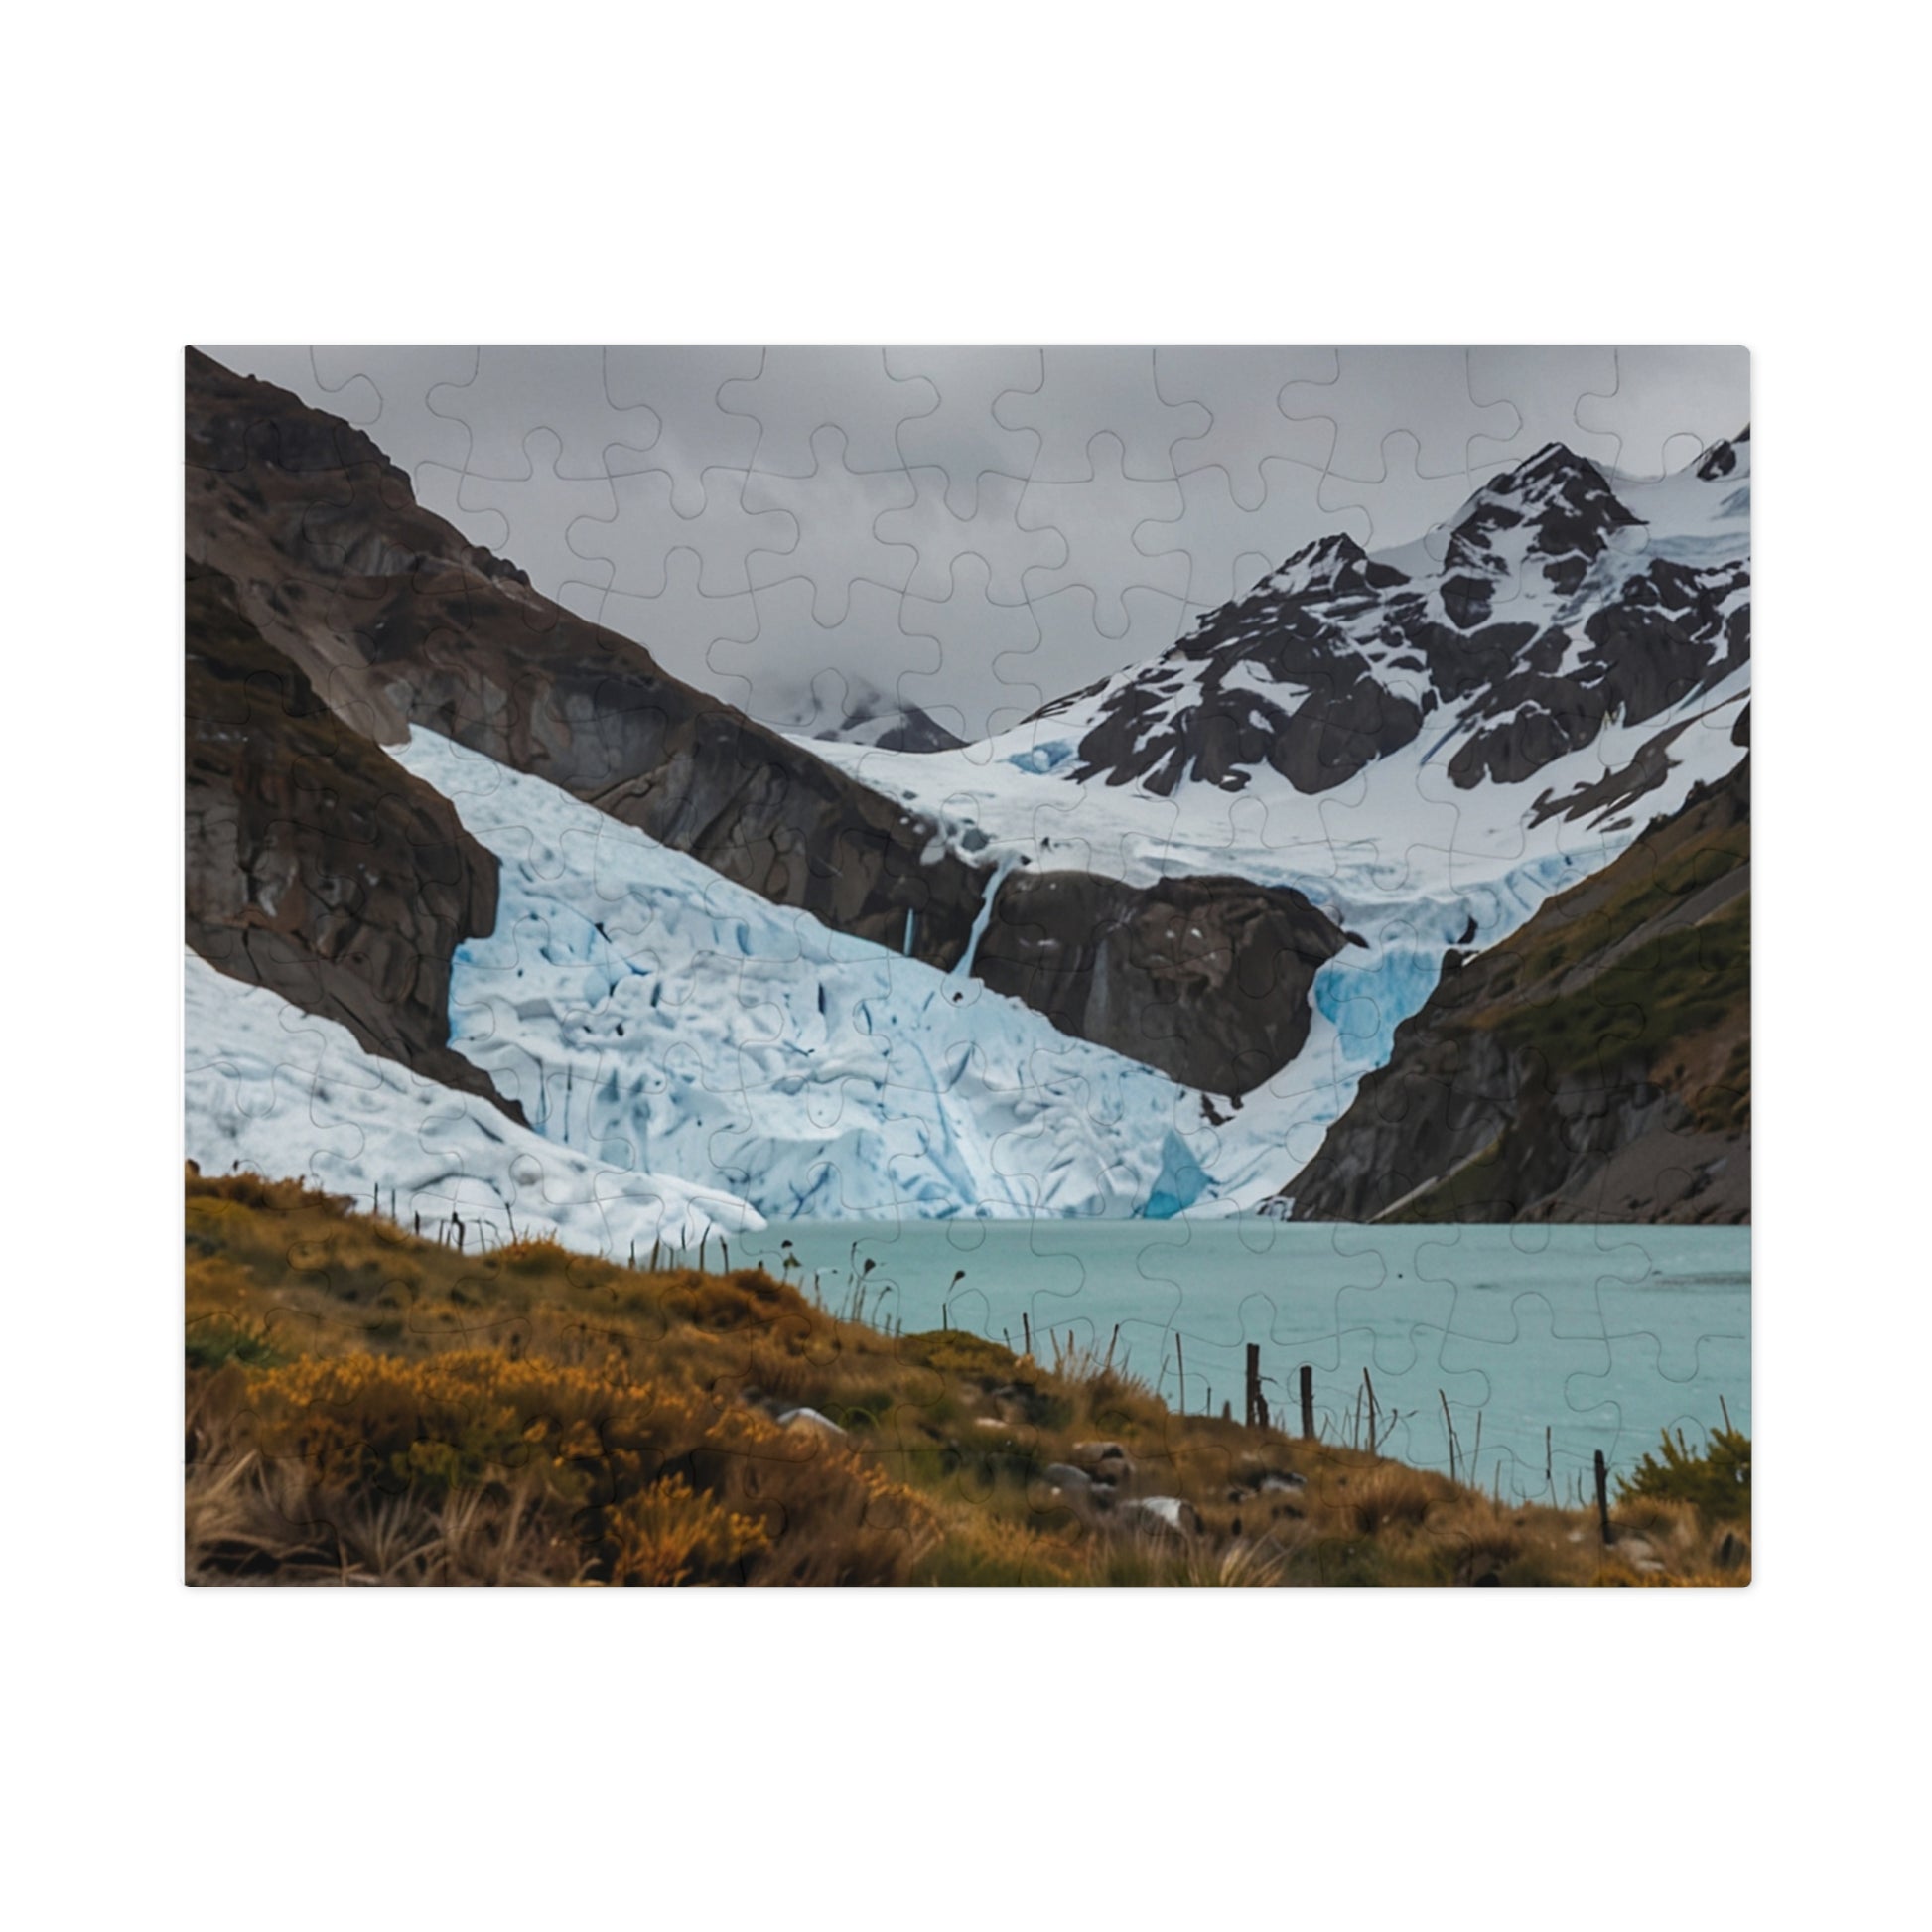 Glacier National Park Icefall Jigsaw Puzzle (252, 500, 1000-Piece) - Puzzlers Paradise